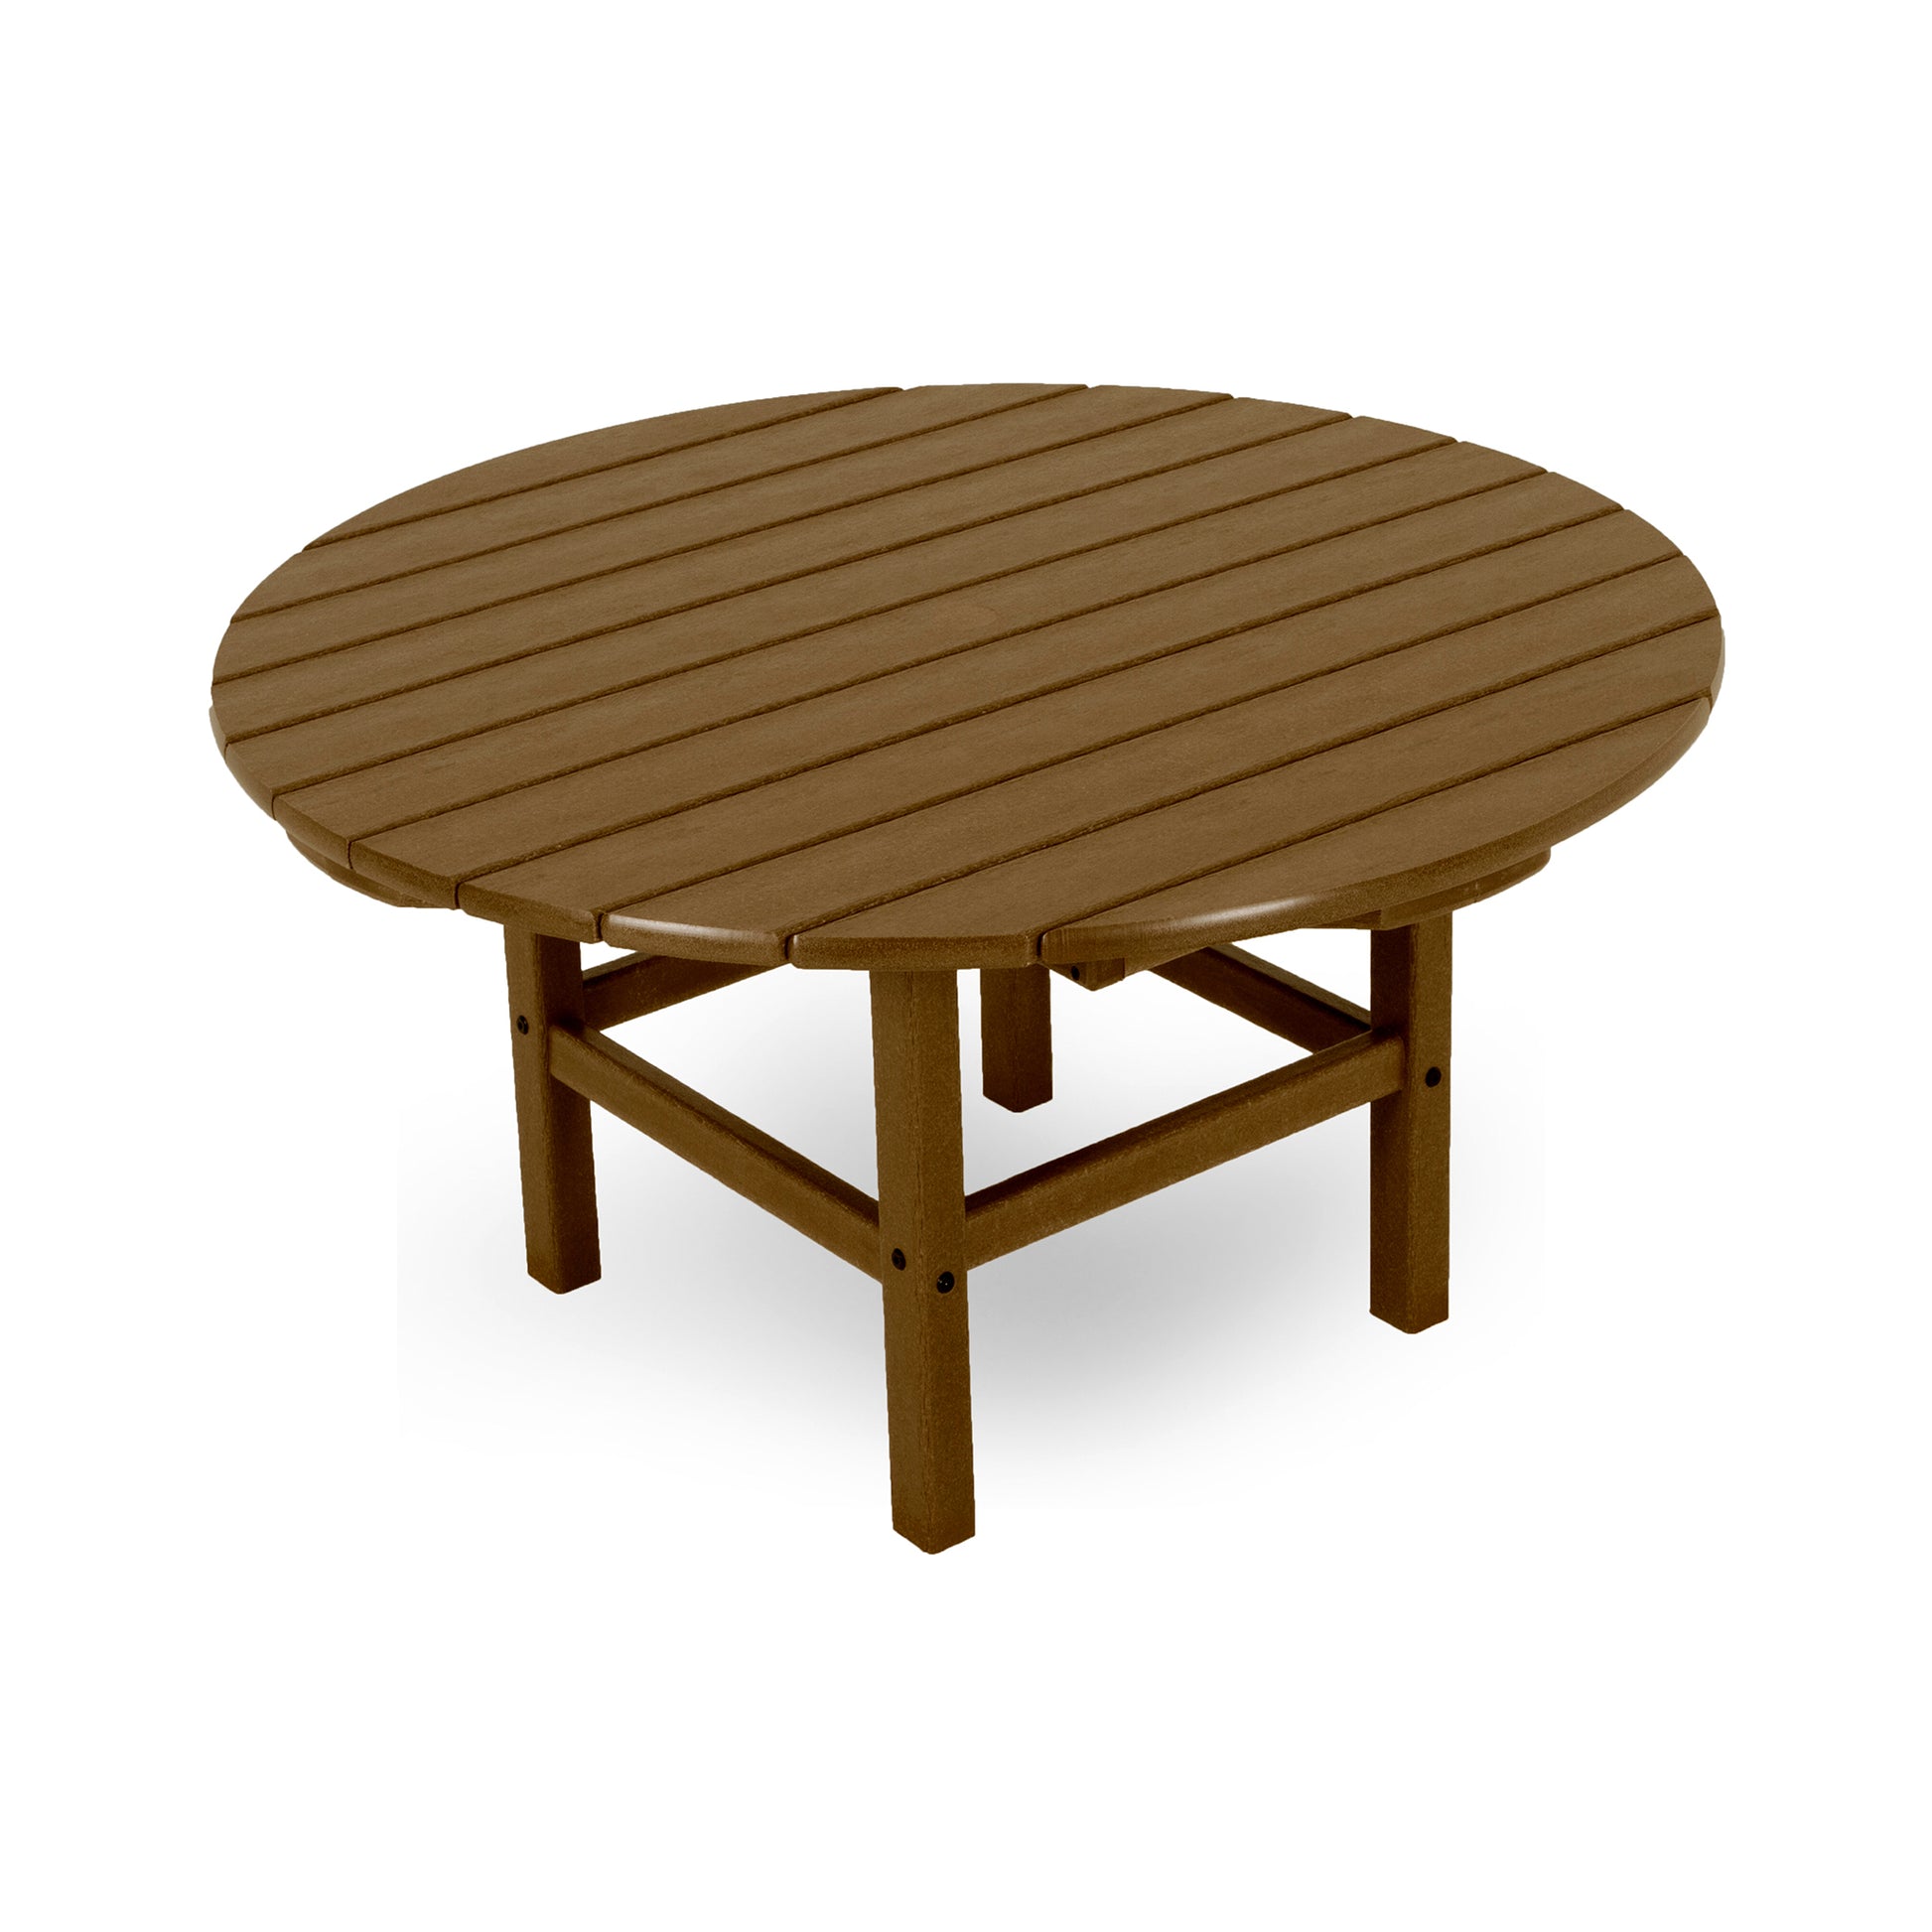 A round, POLYWOOD® Outdoor 38" Conversation Table with horizontal plank design and four legs, set against a white background.